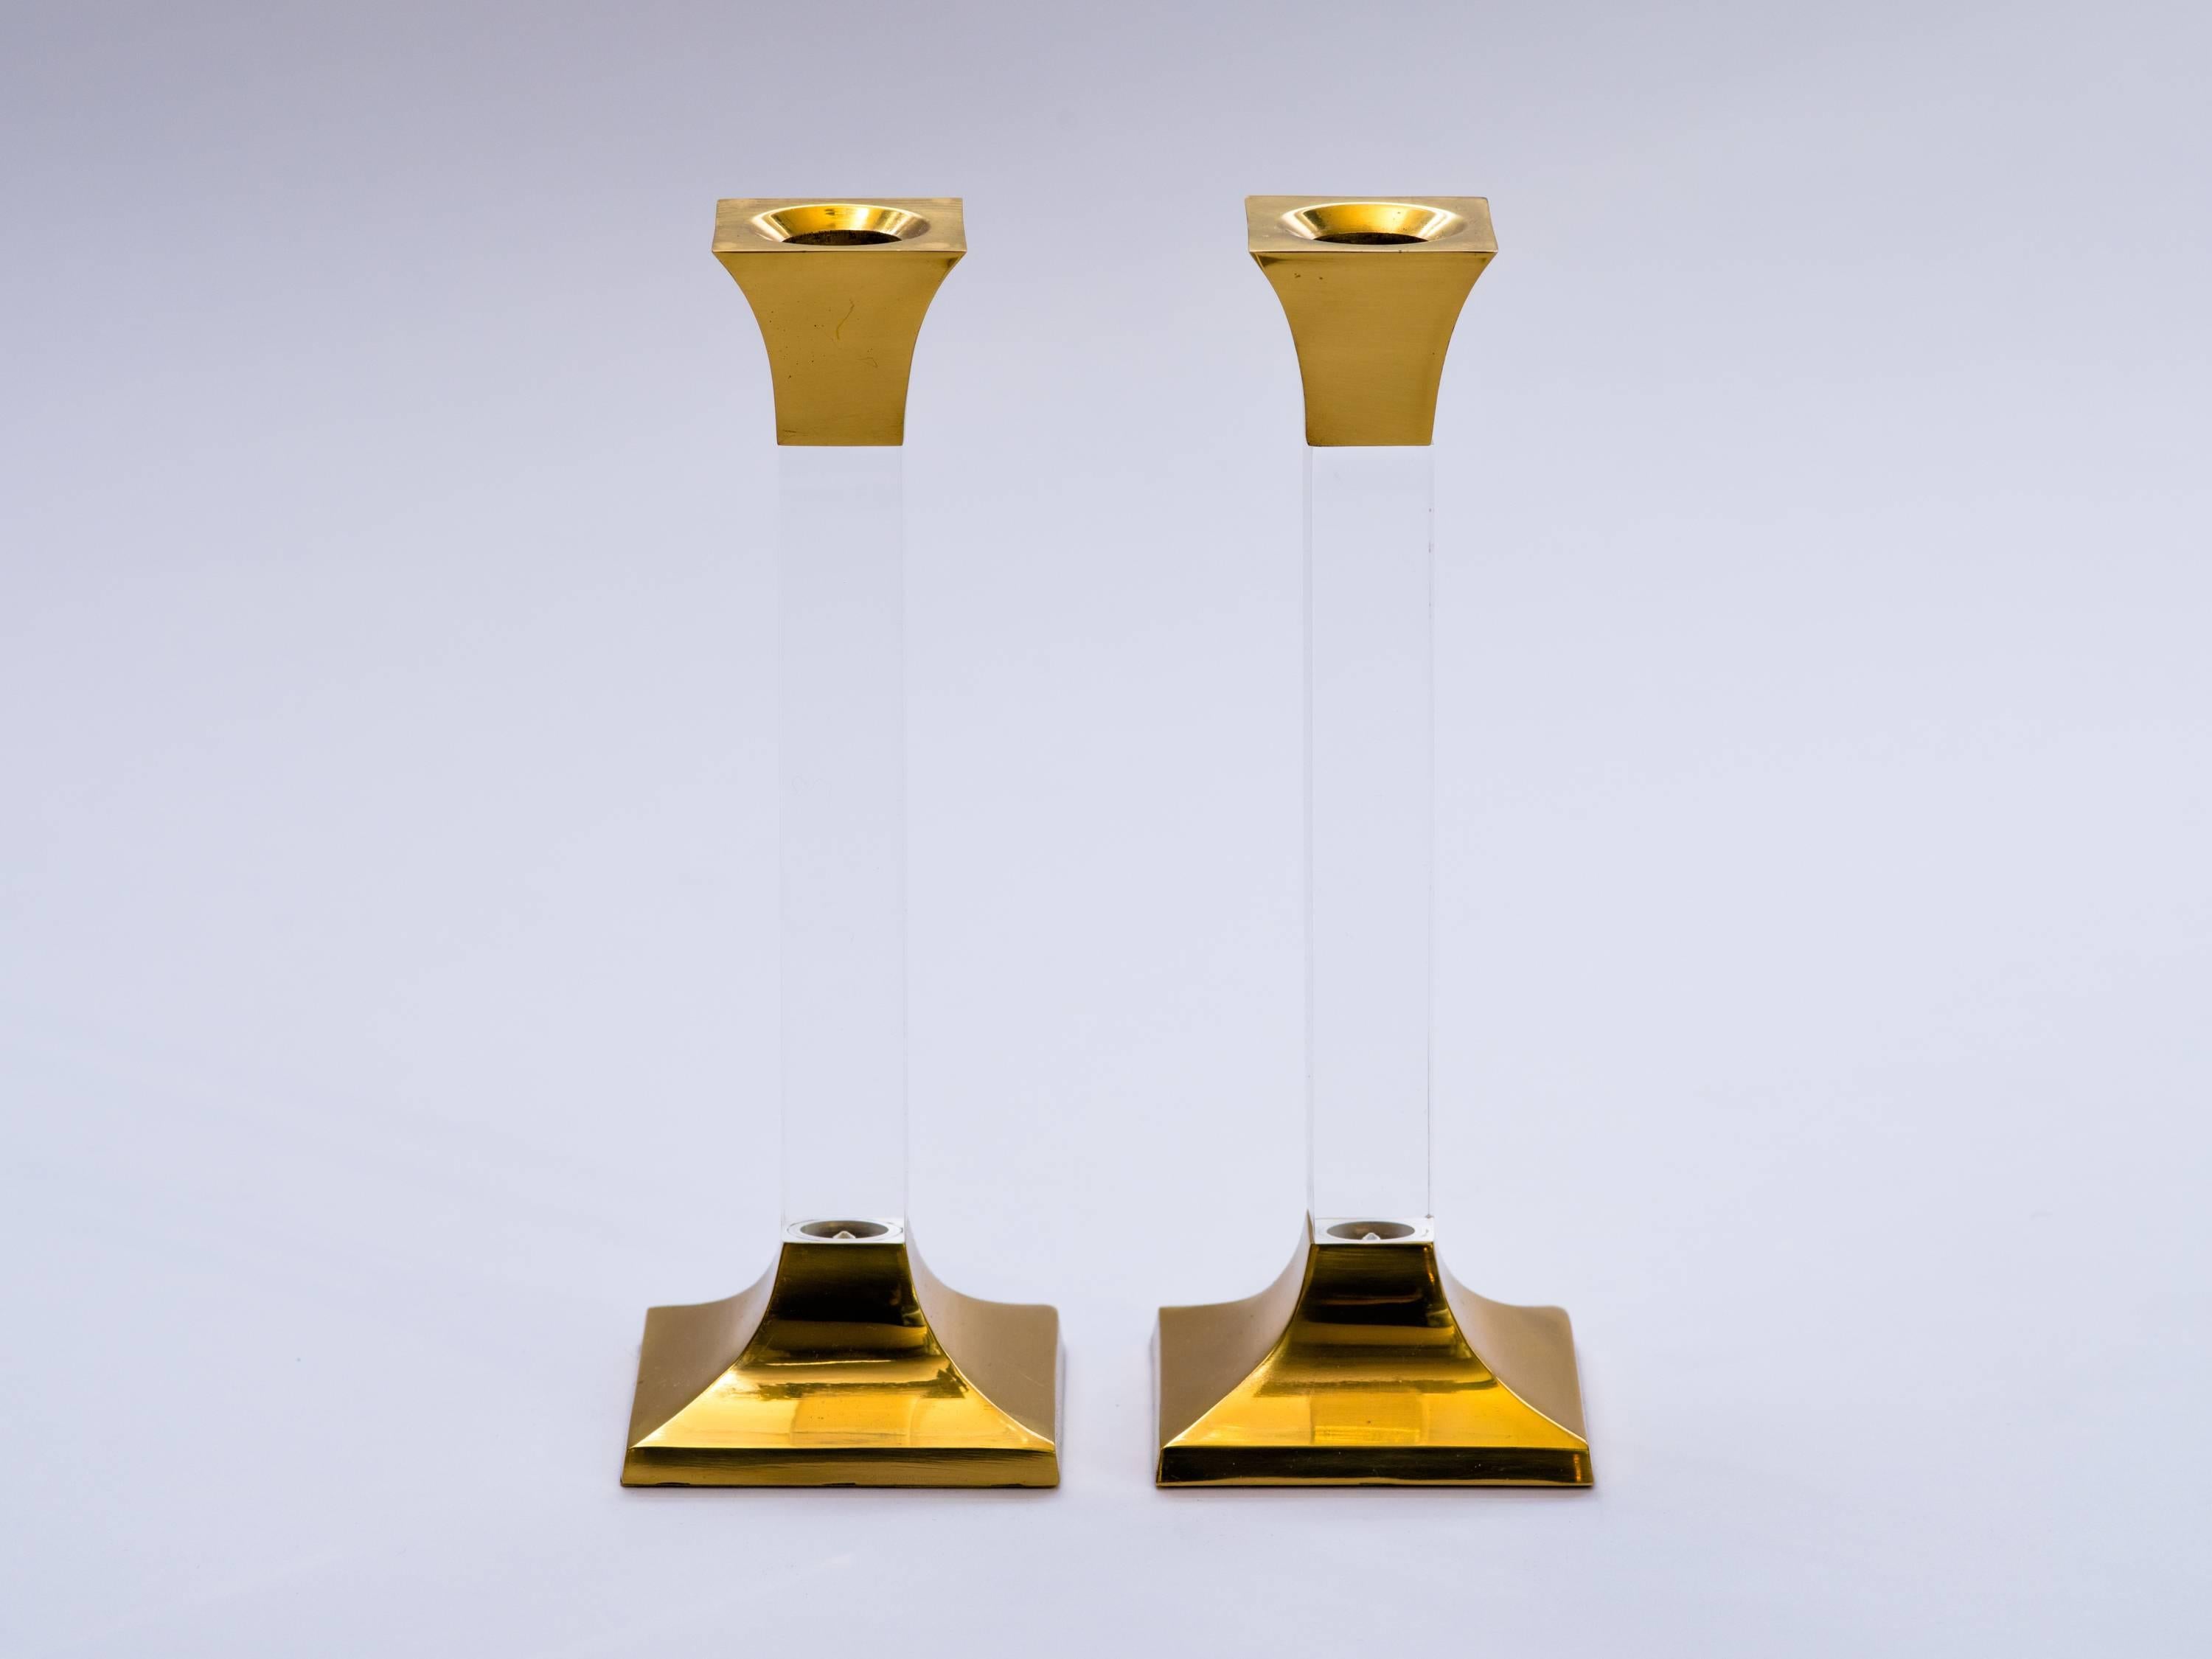 Pair of chic Mid-Century Modern candlesticks with plinth column design. Comprised of brass metal bases with polished lucite stems. 